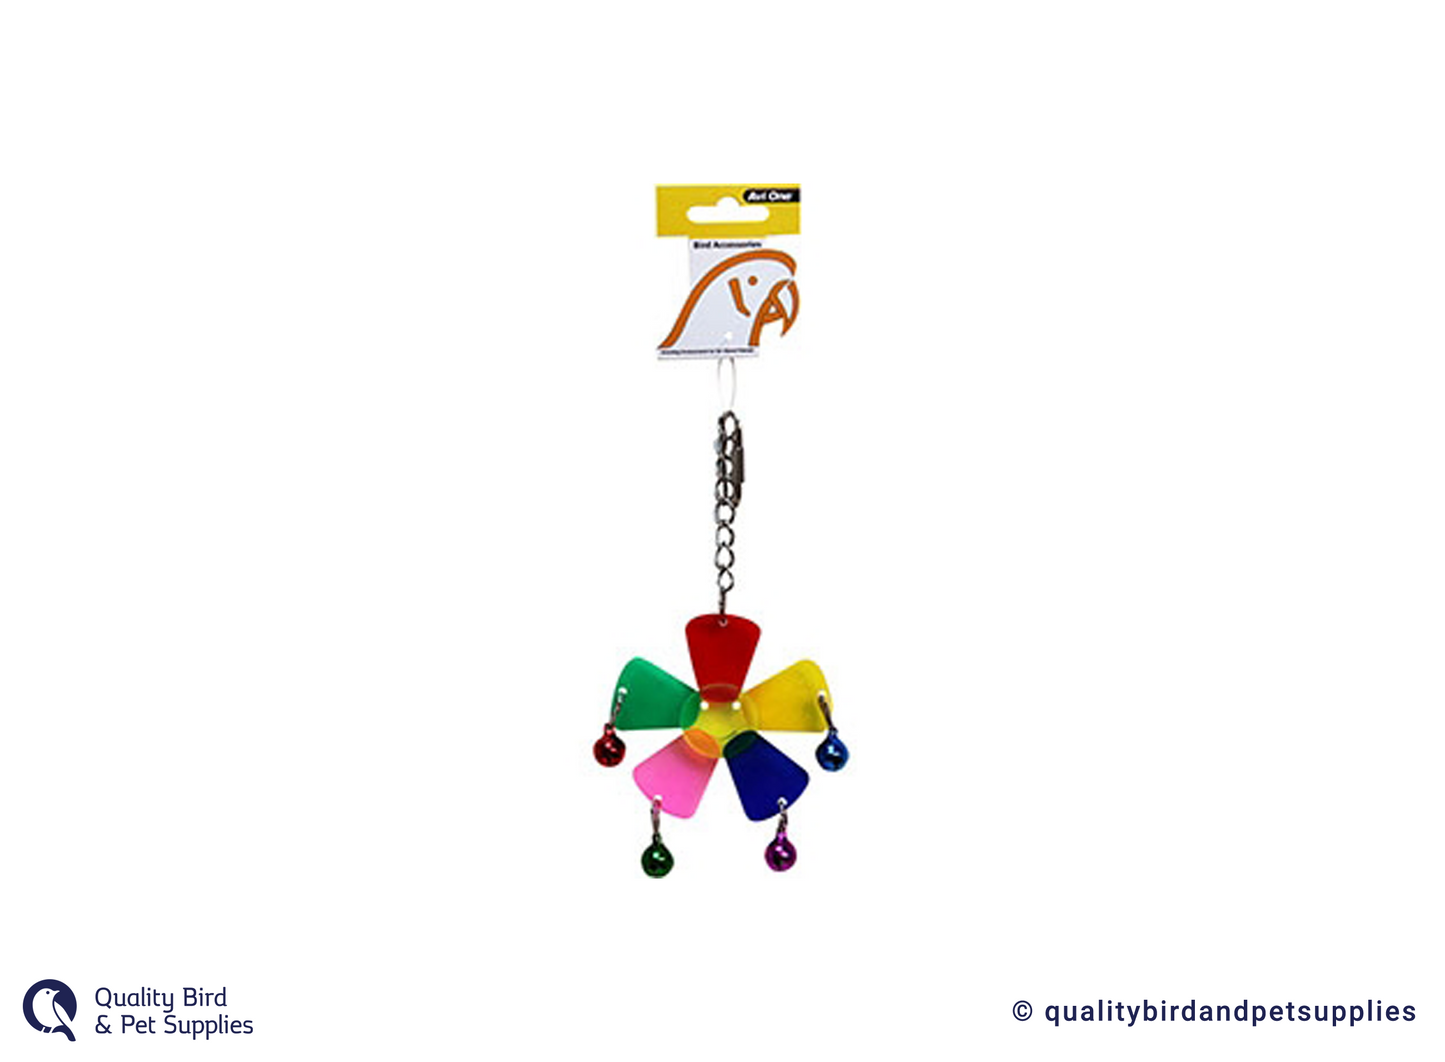 Avi One Acrylic Blossom with Bell Balls Bird Toy